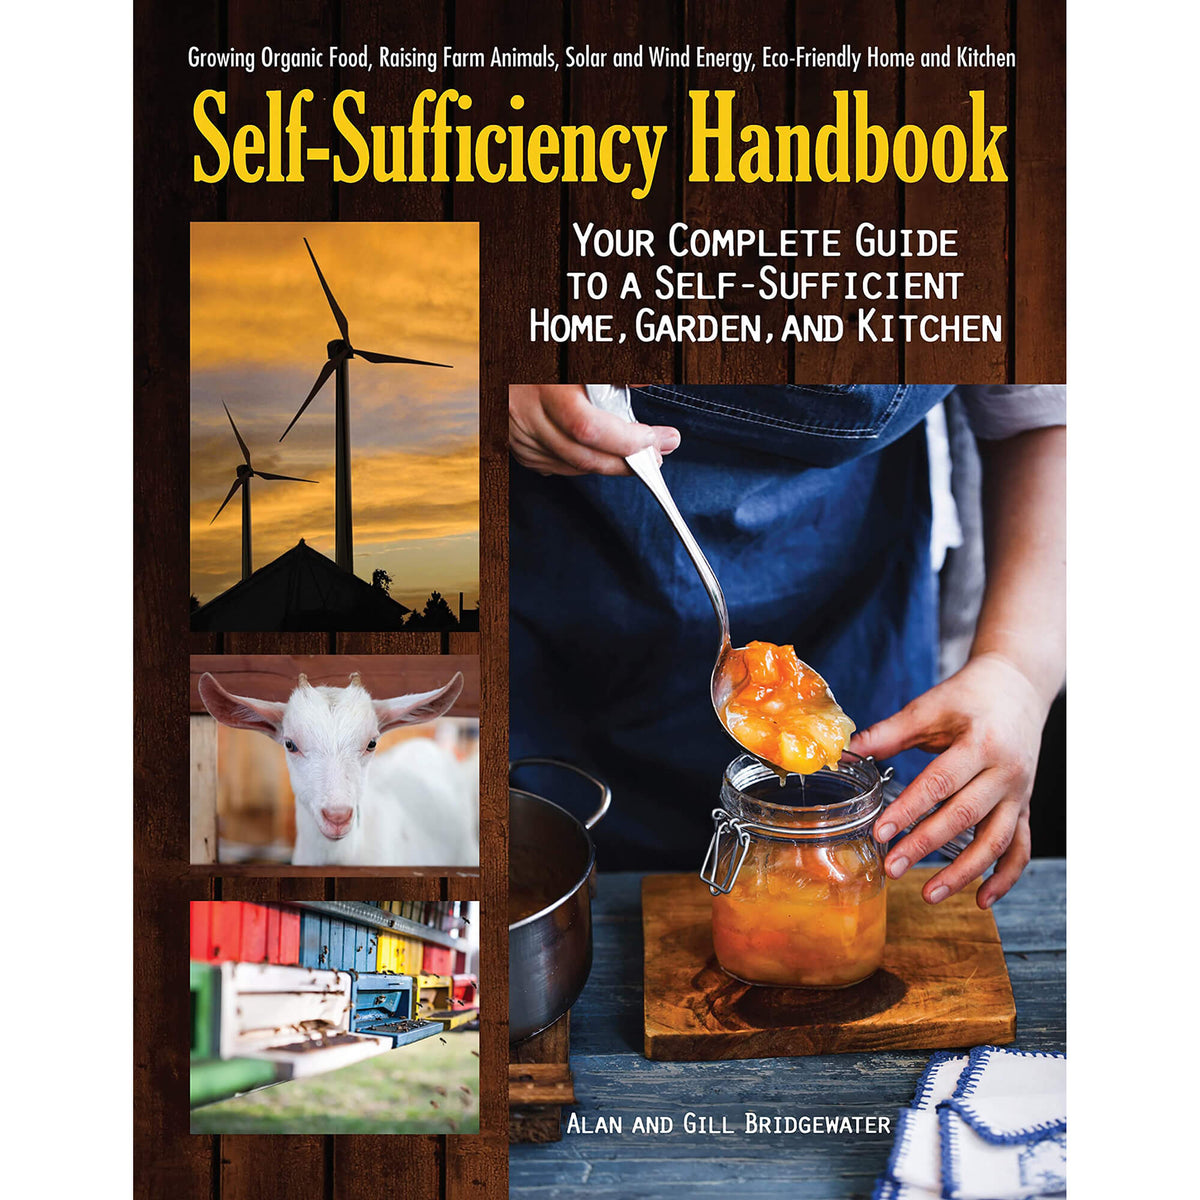 Self Sufficiency Handbook: Your Complete Guide to a Self-Sufficient Home, Garden, and Kitchen front cover.